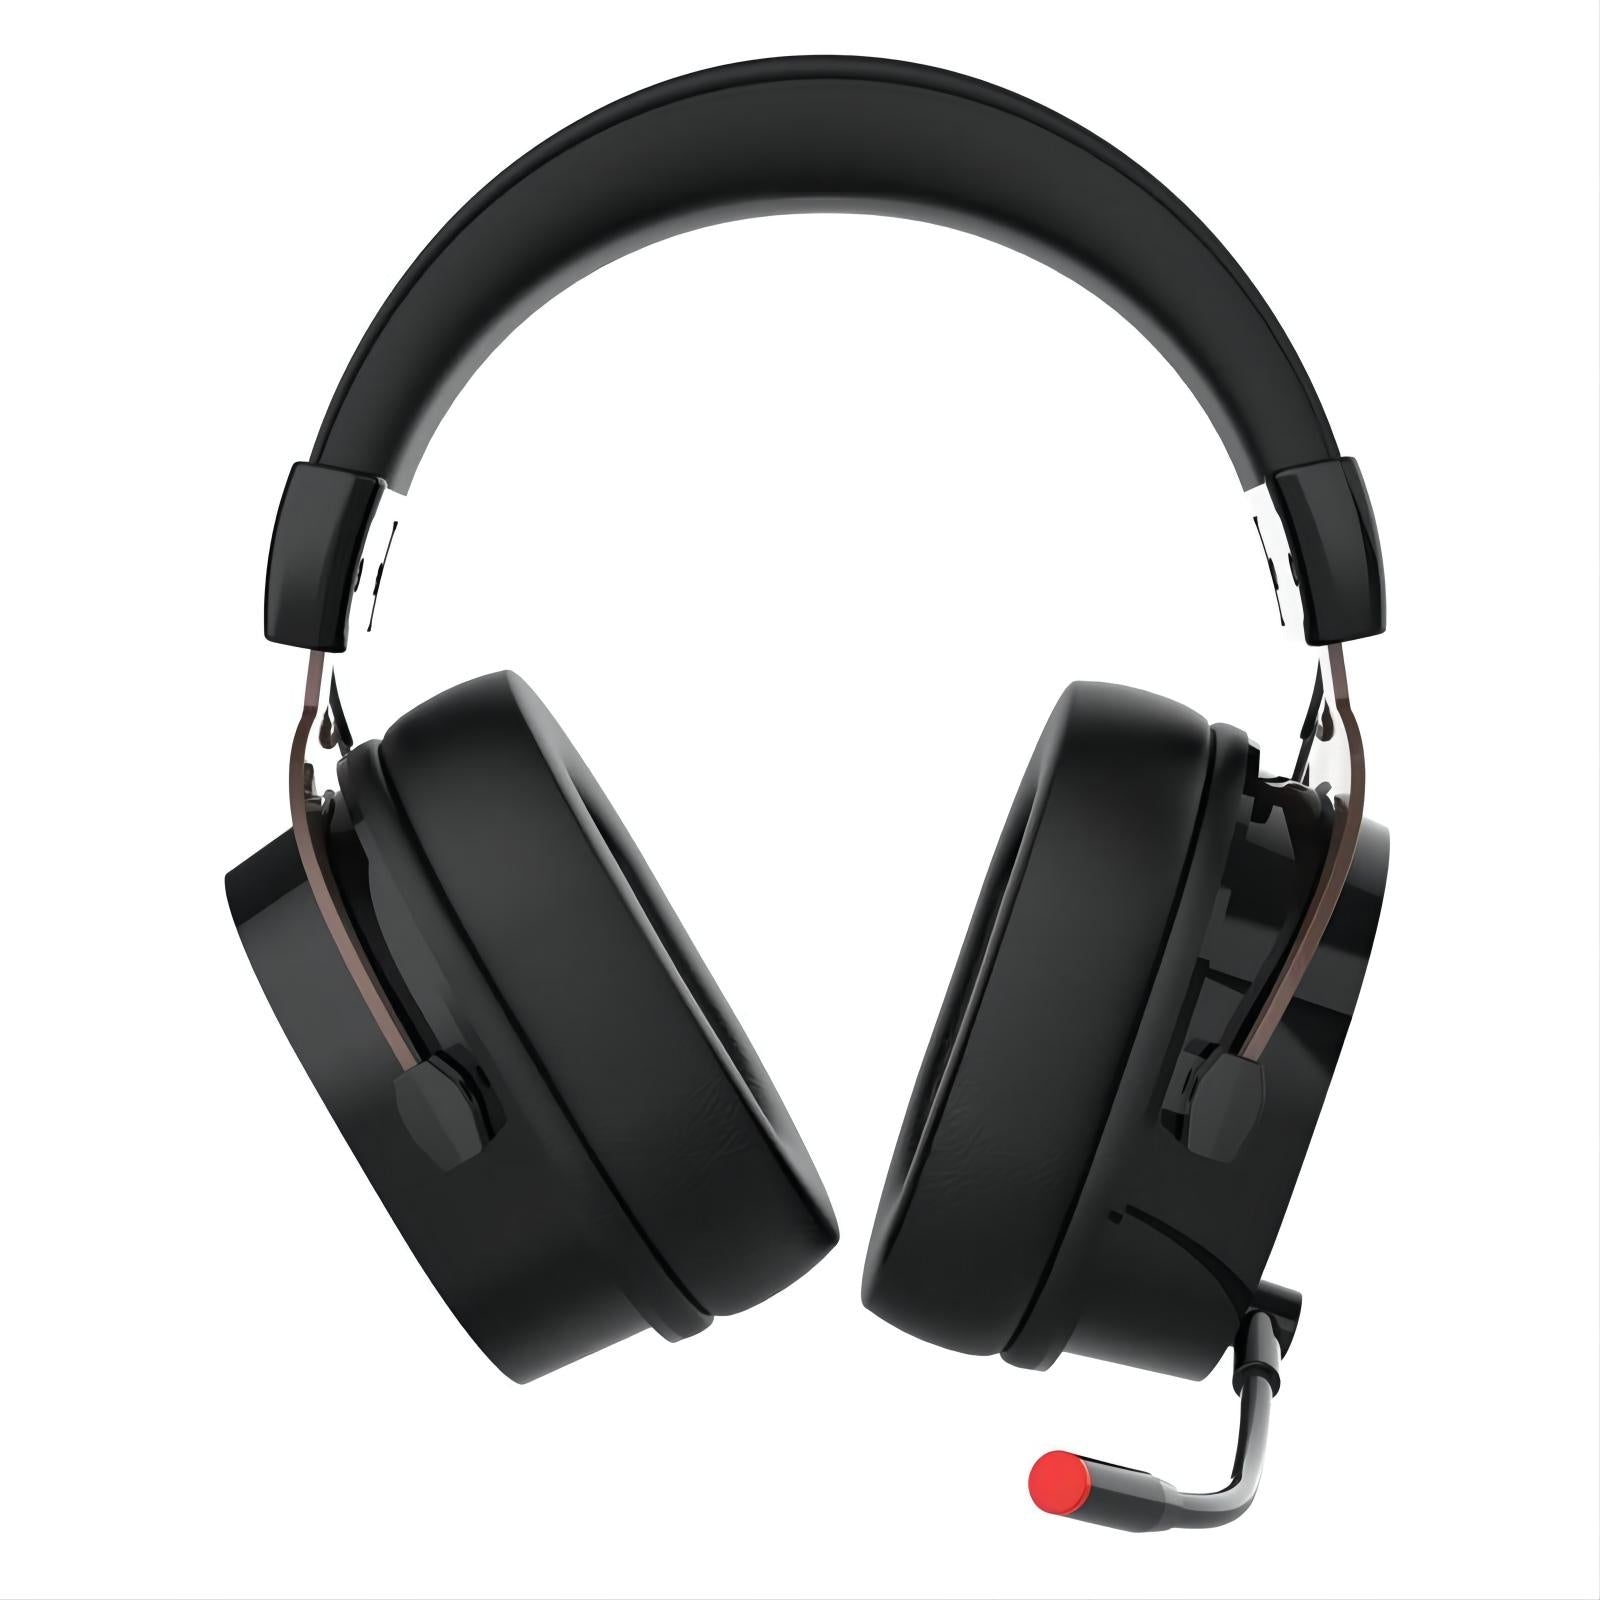 MonkeyTEC Bluetooth Wireless Gaming Headset Microphone Headphones G1000 LED Effect Wireless Gaming